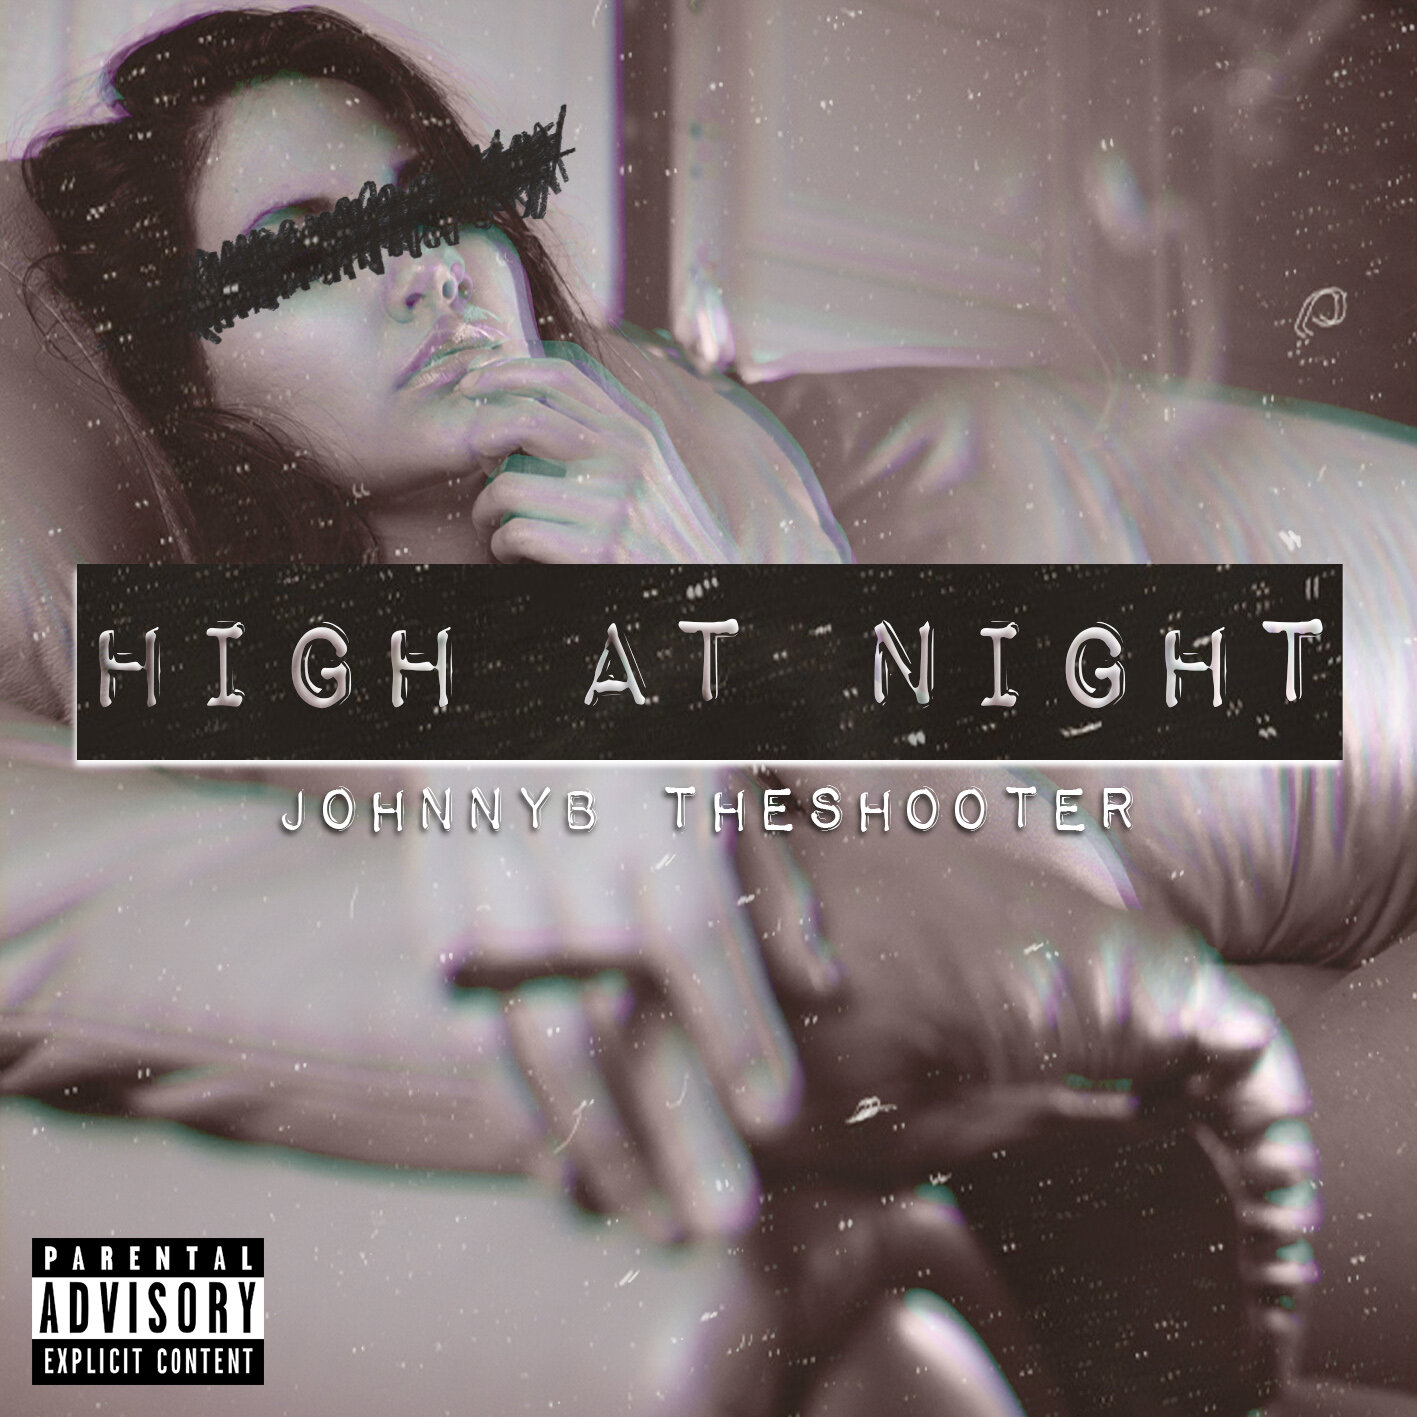 High At Night - JohnnyB theShooter COVER.jpg